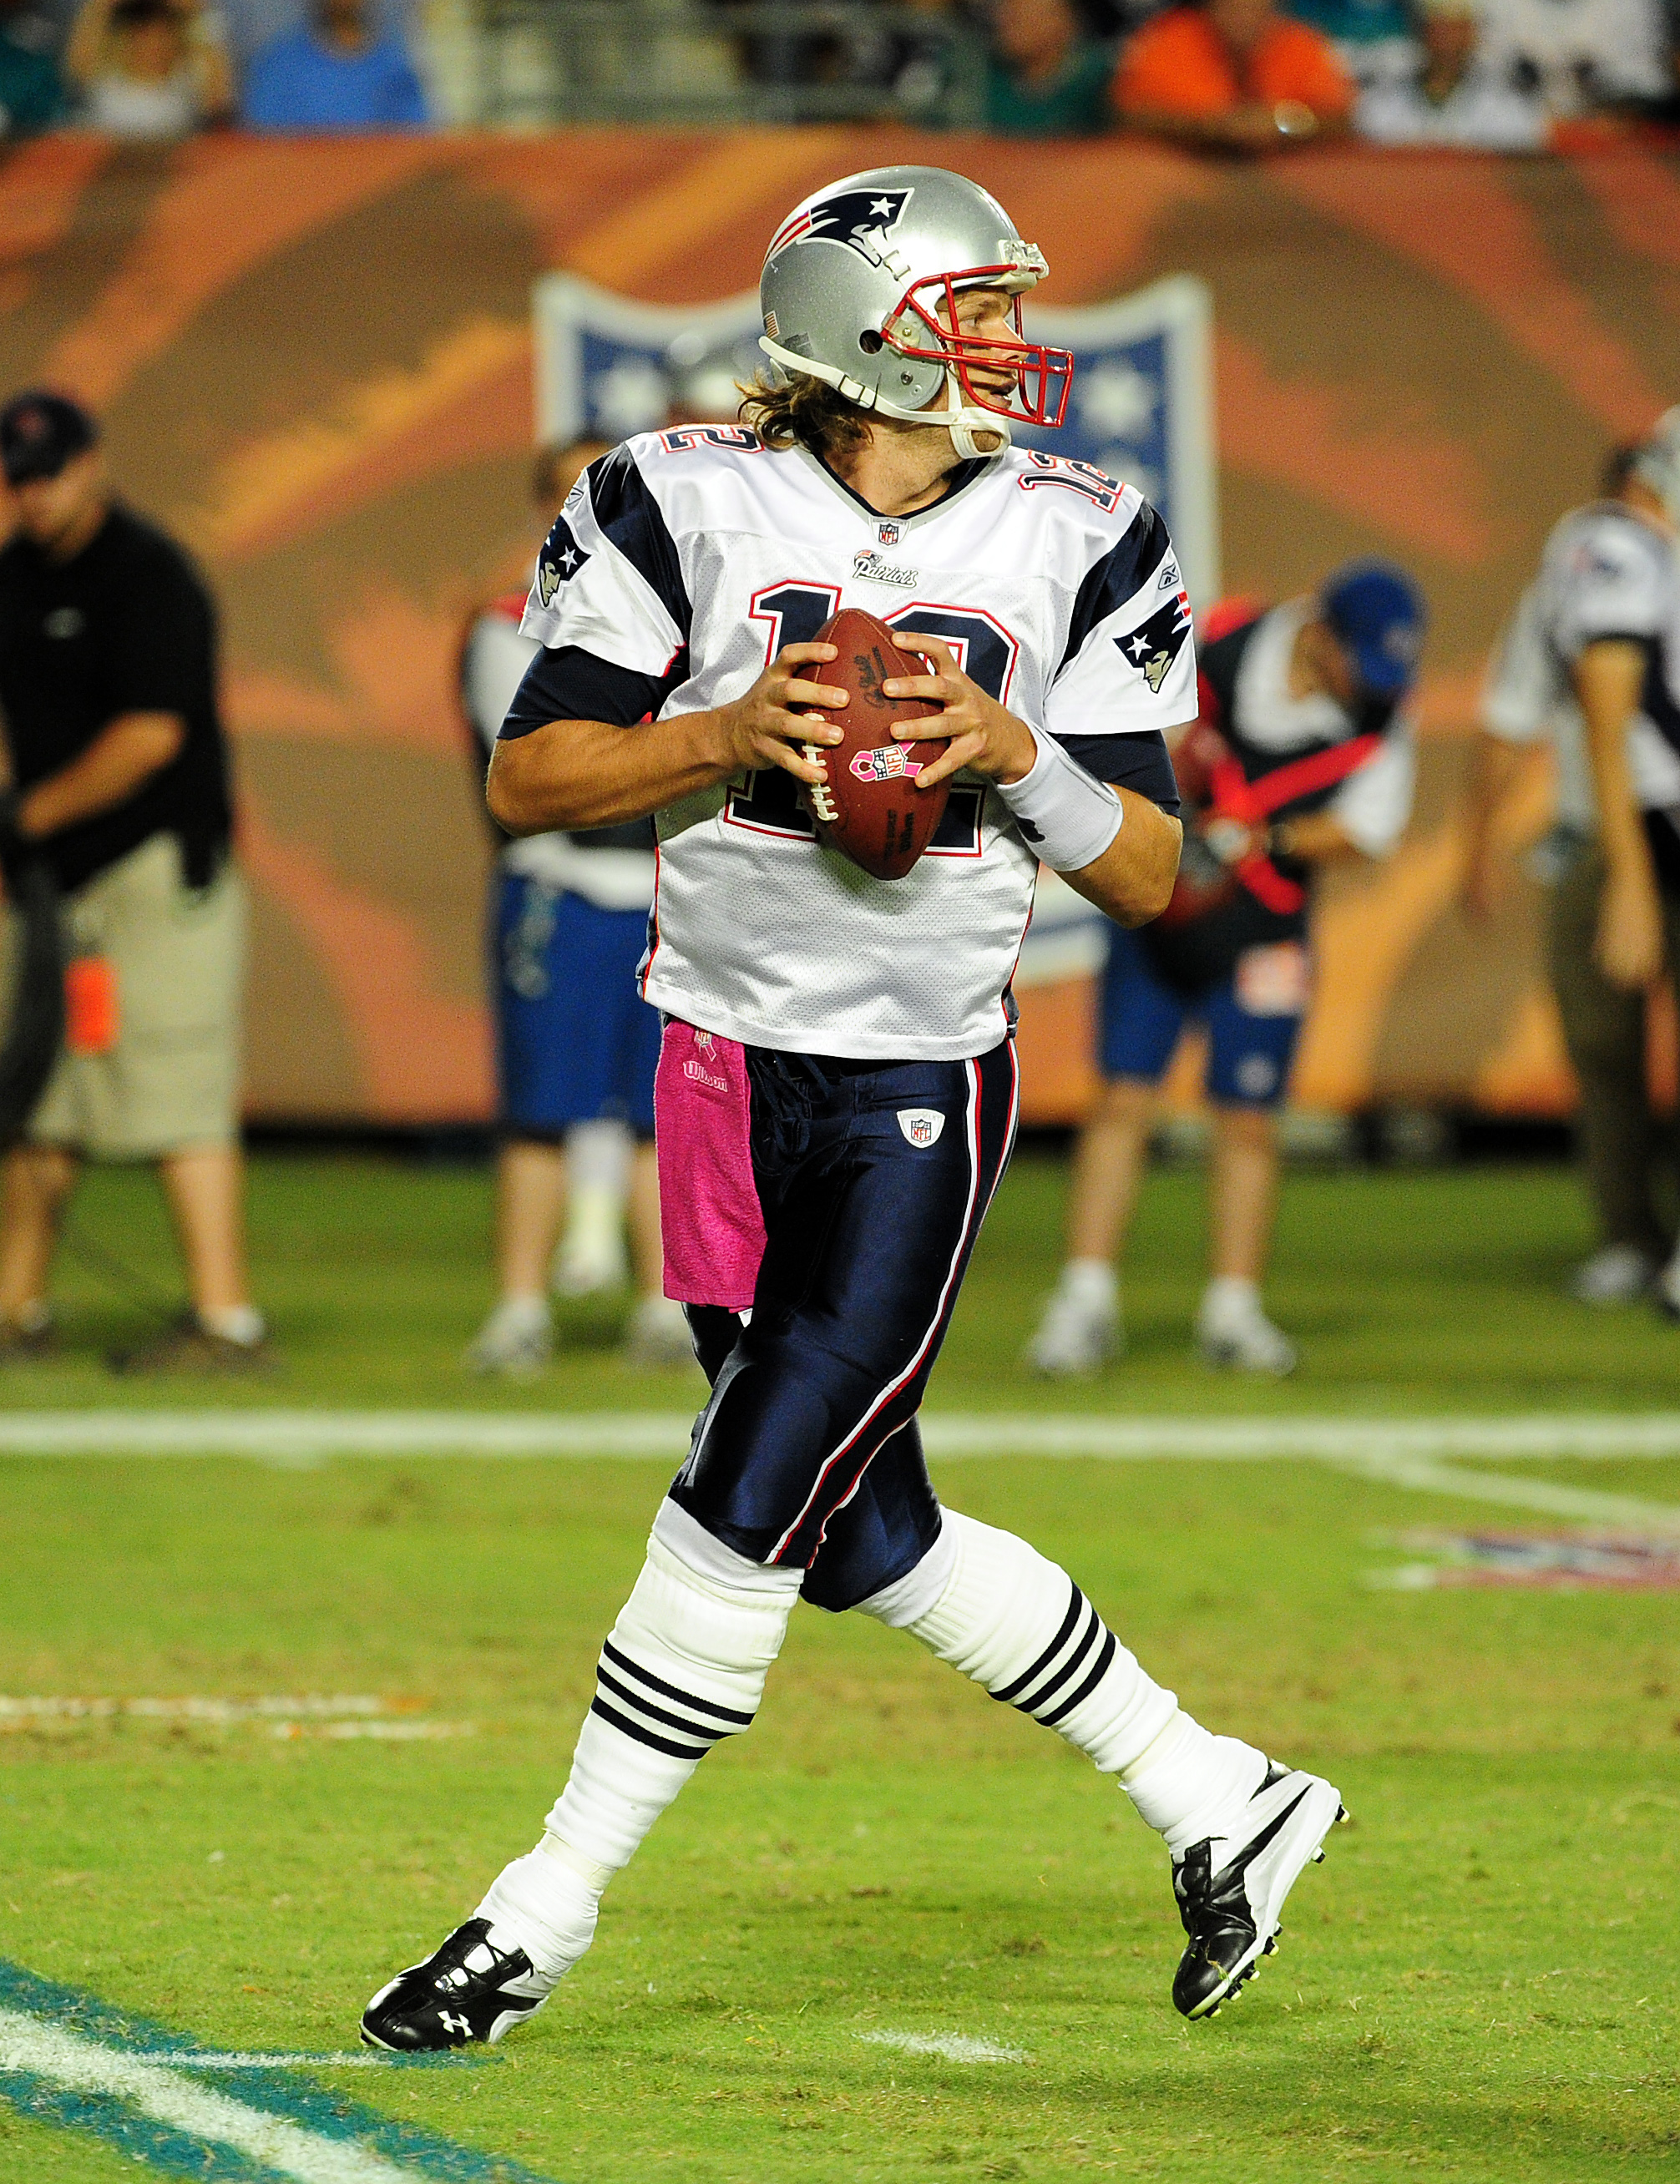 New England Patriots' Tom Brady: Five fun facts about the Pro Bowl